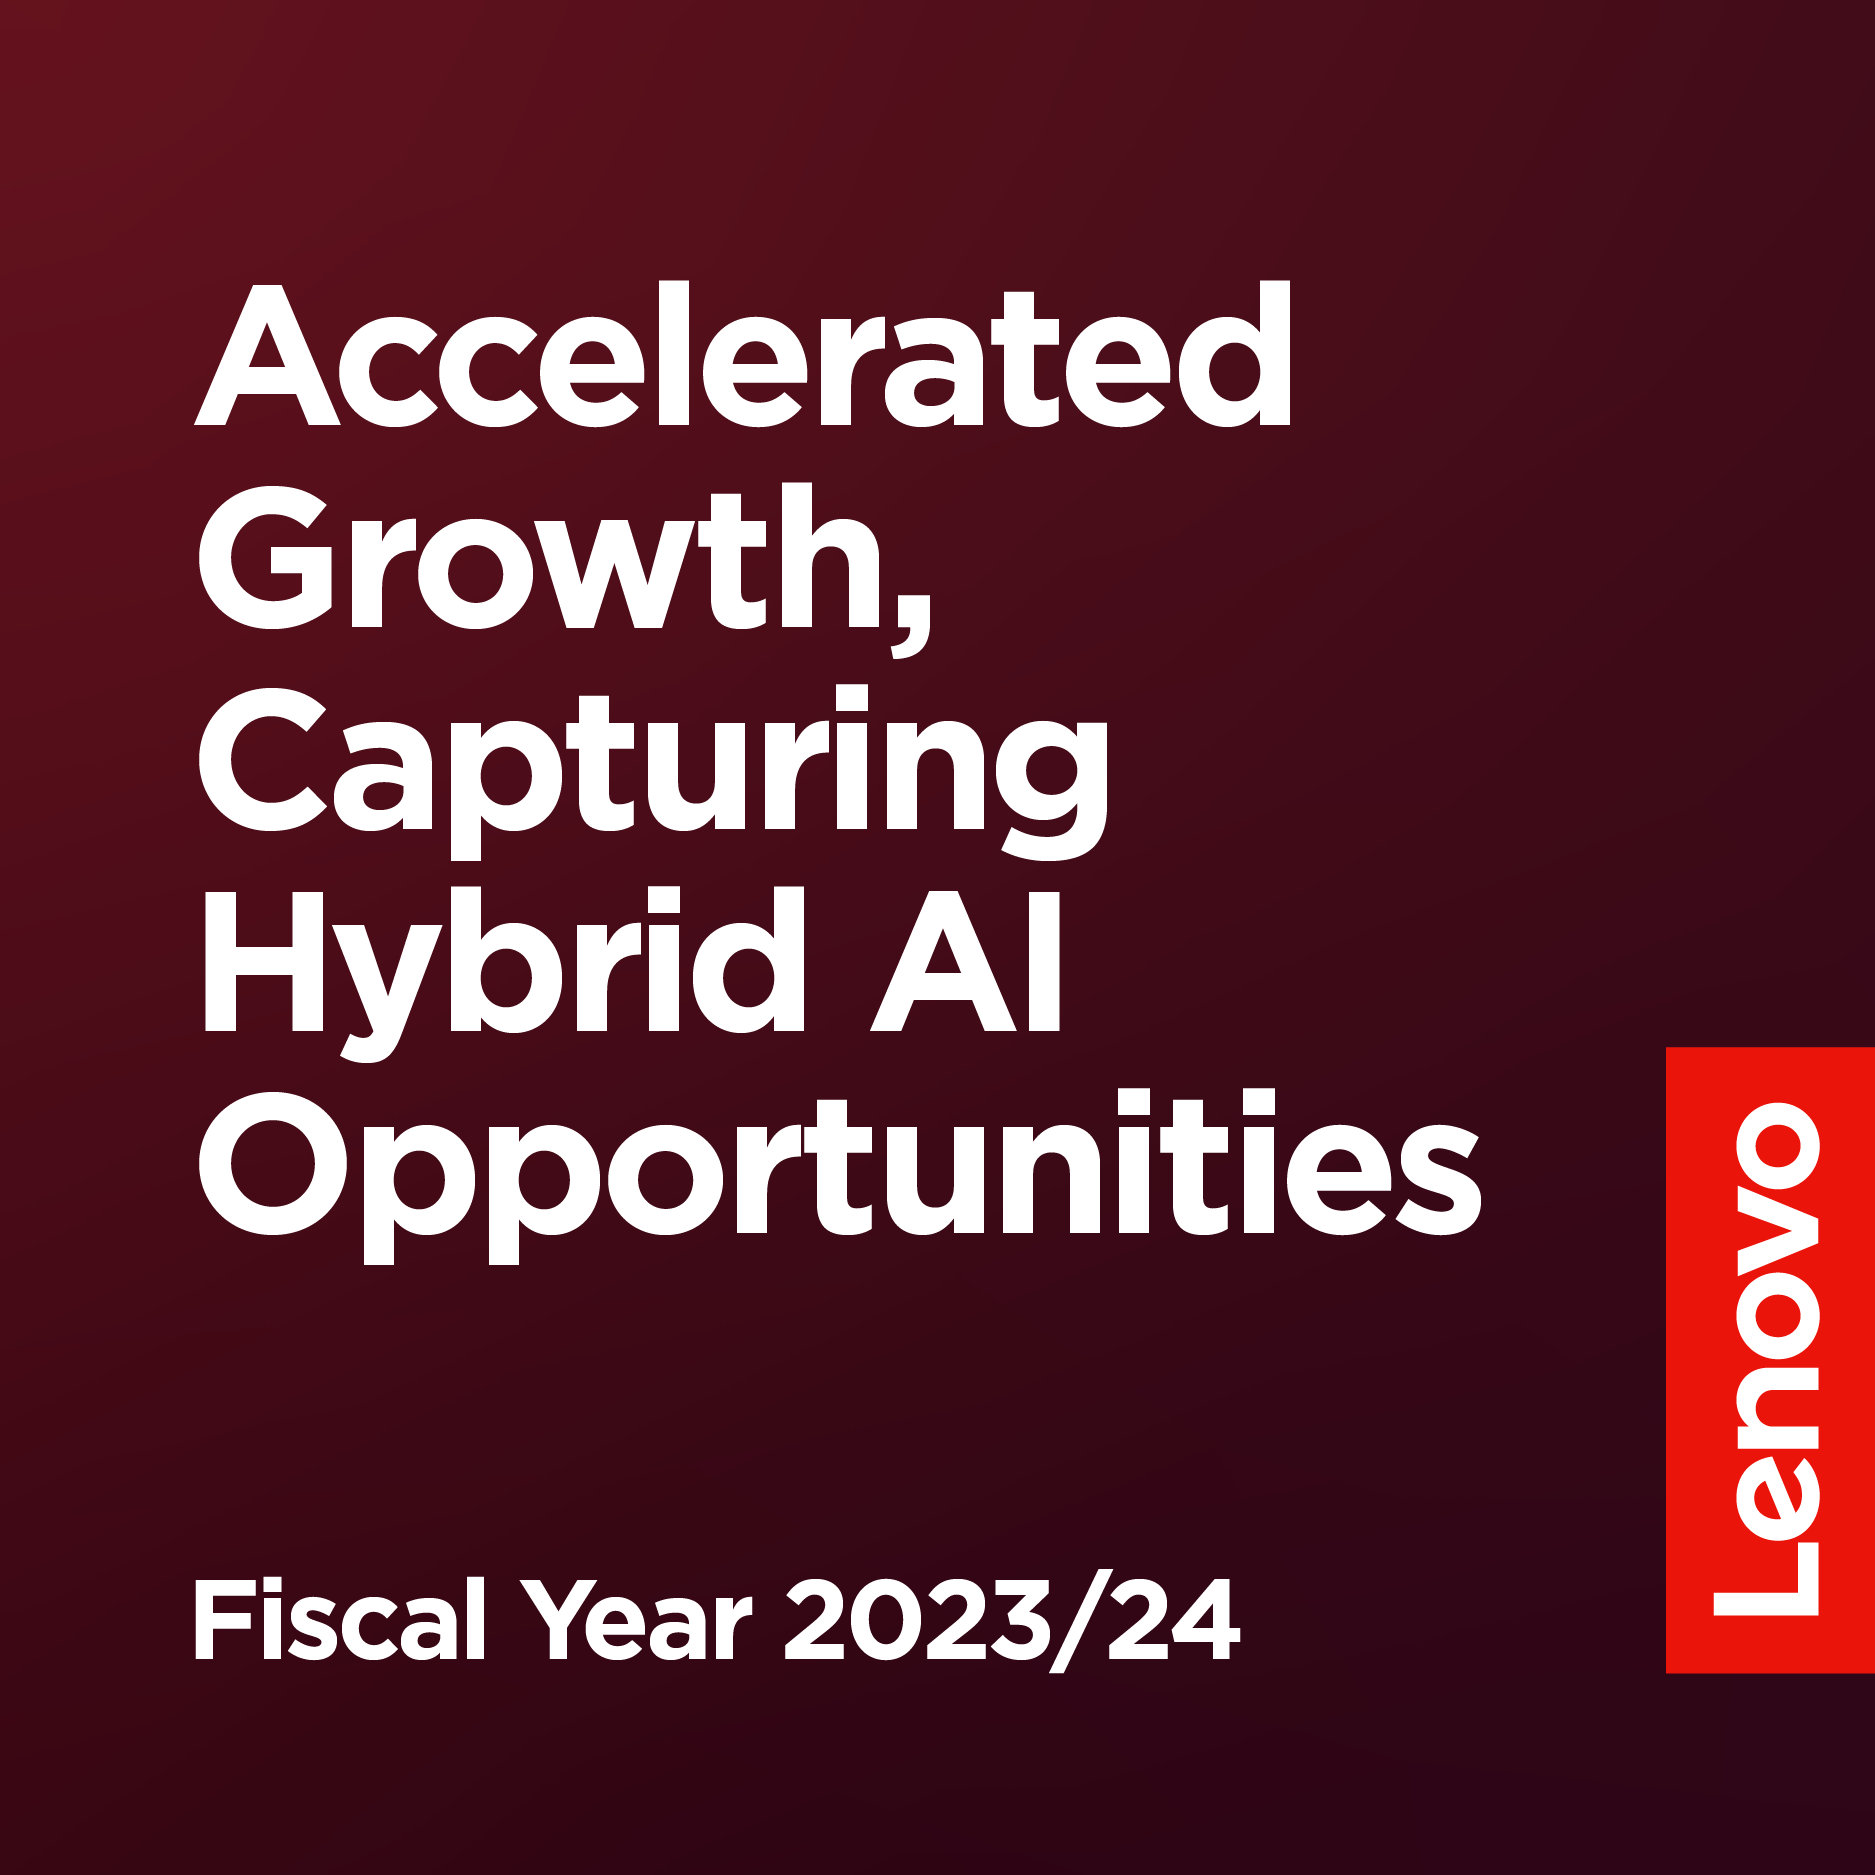 Lenovo’s Growth Accelerates in Q4 FY 23/24 – Capturing Hybrid AI Opportunities